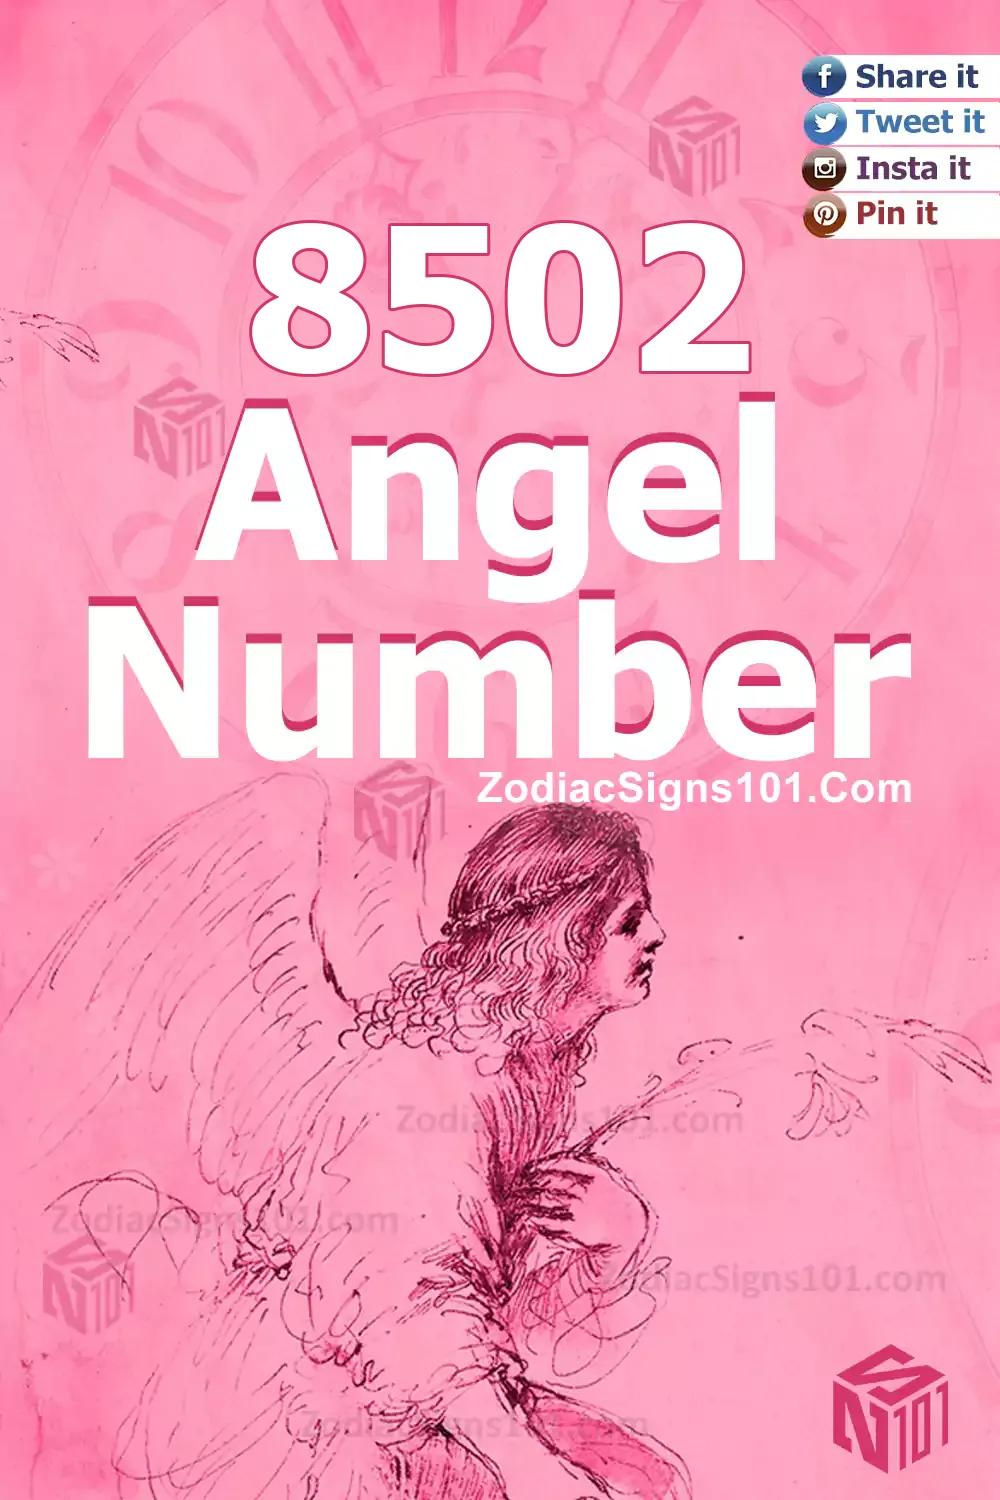 8502 Angel Number Meaning